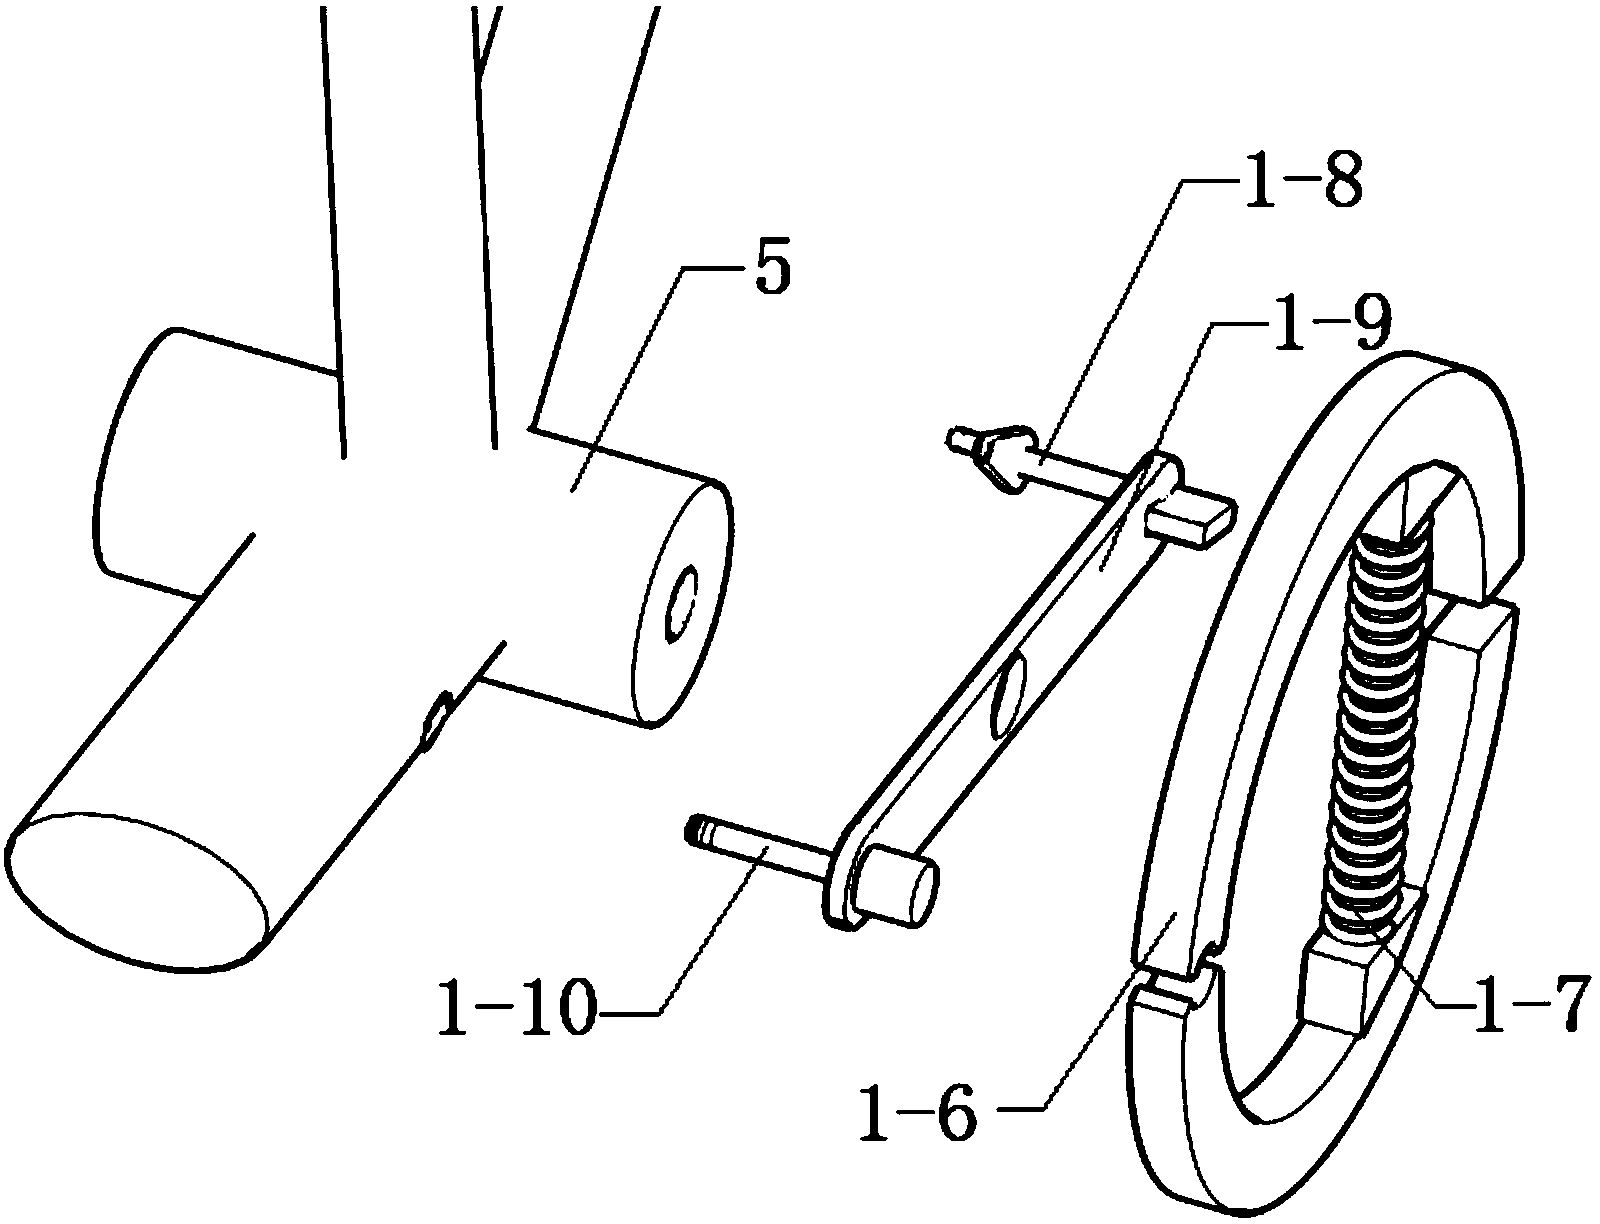 Novel linear speed change device for bicycle